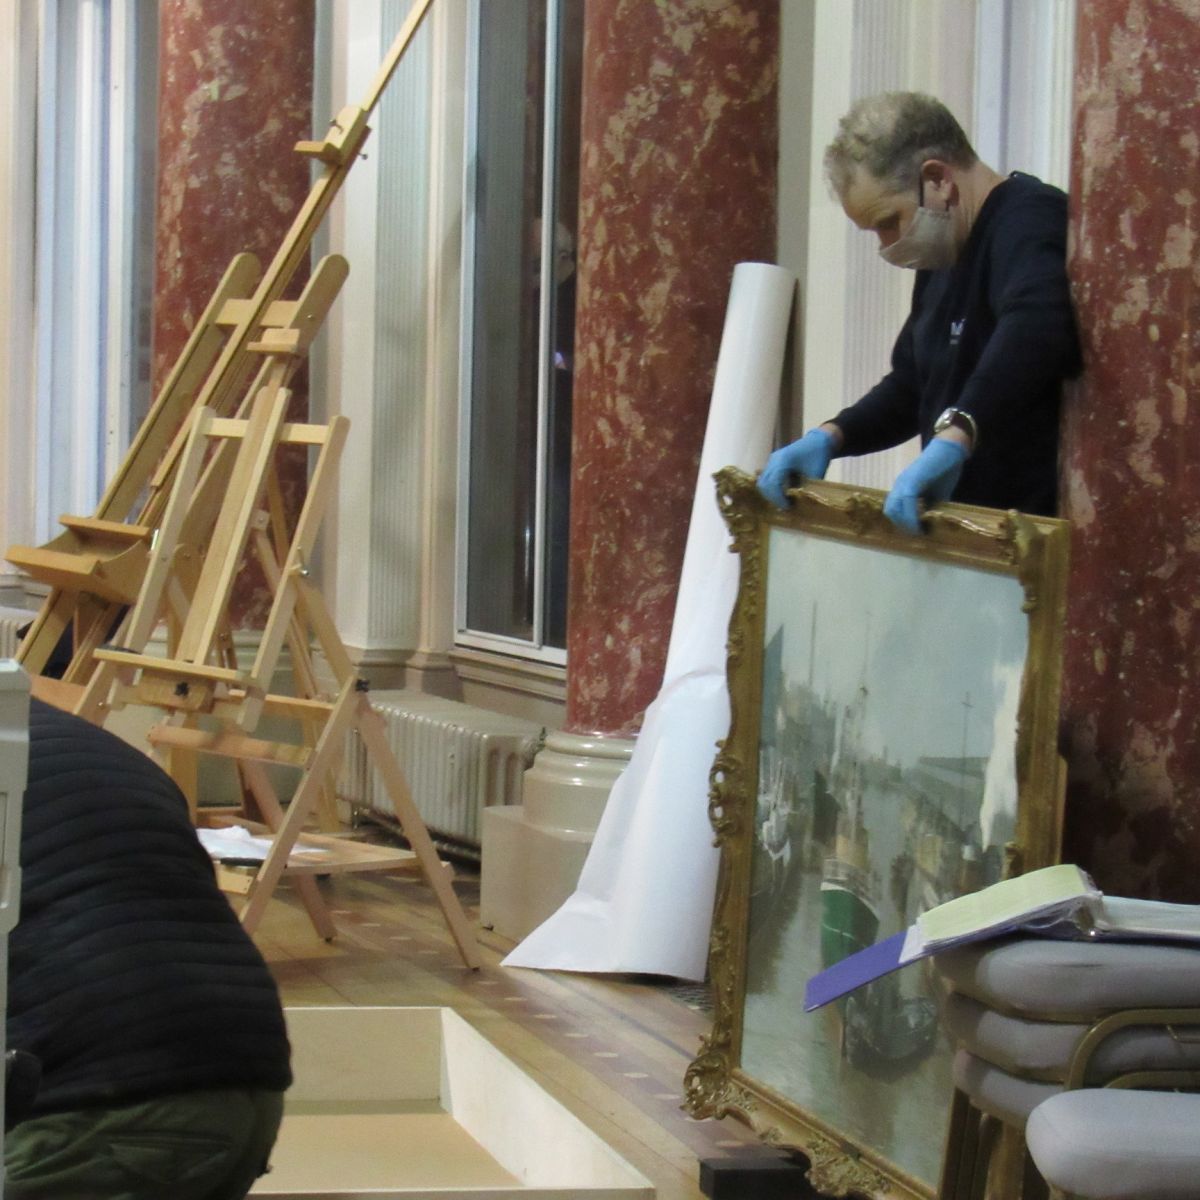 Technicians Start To Pack The Paintings For Transport